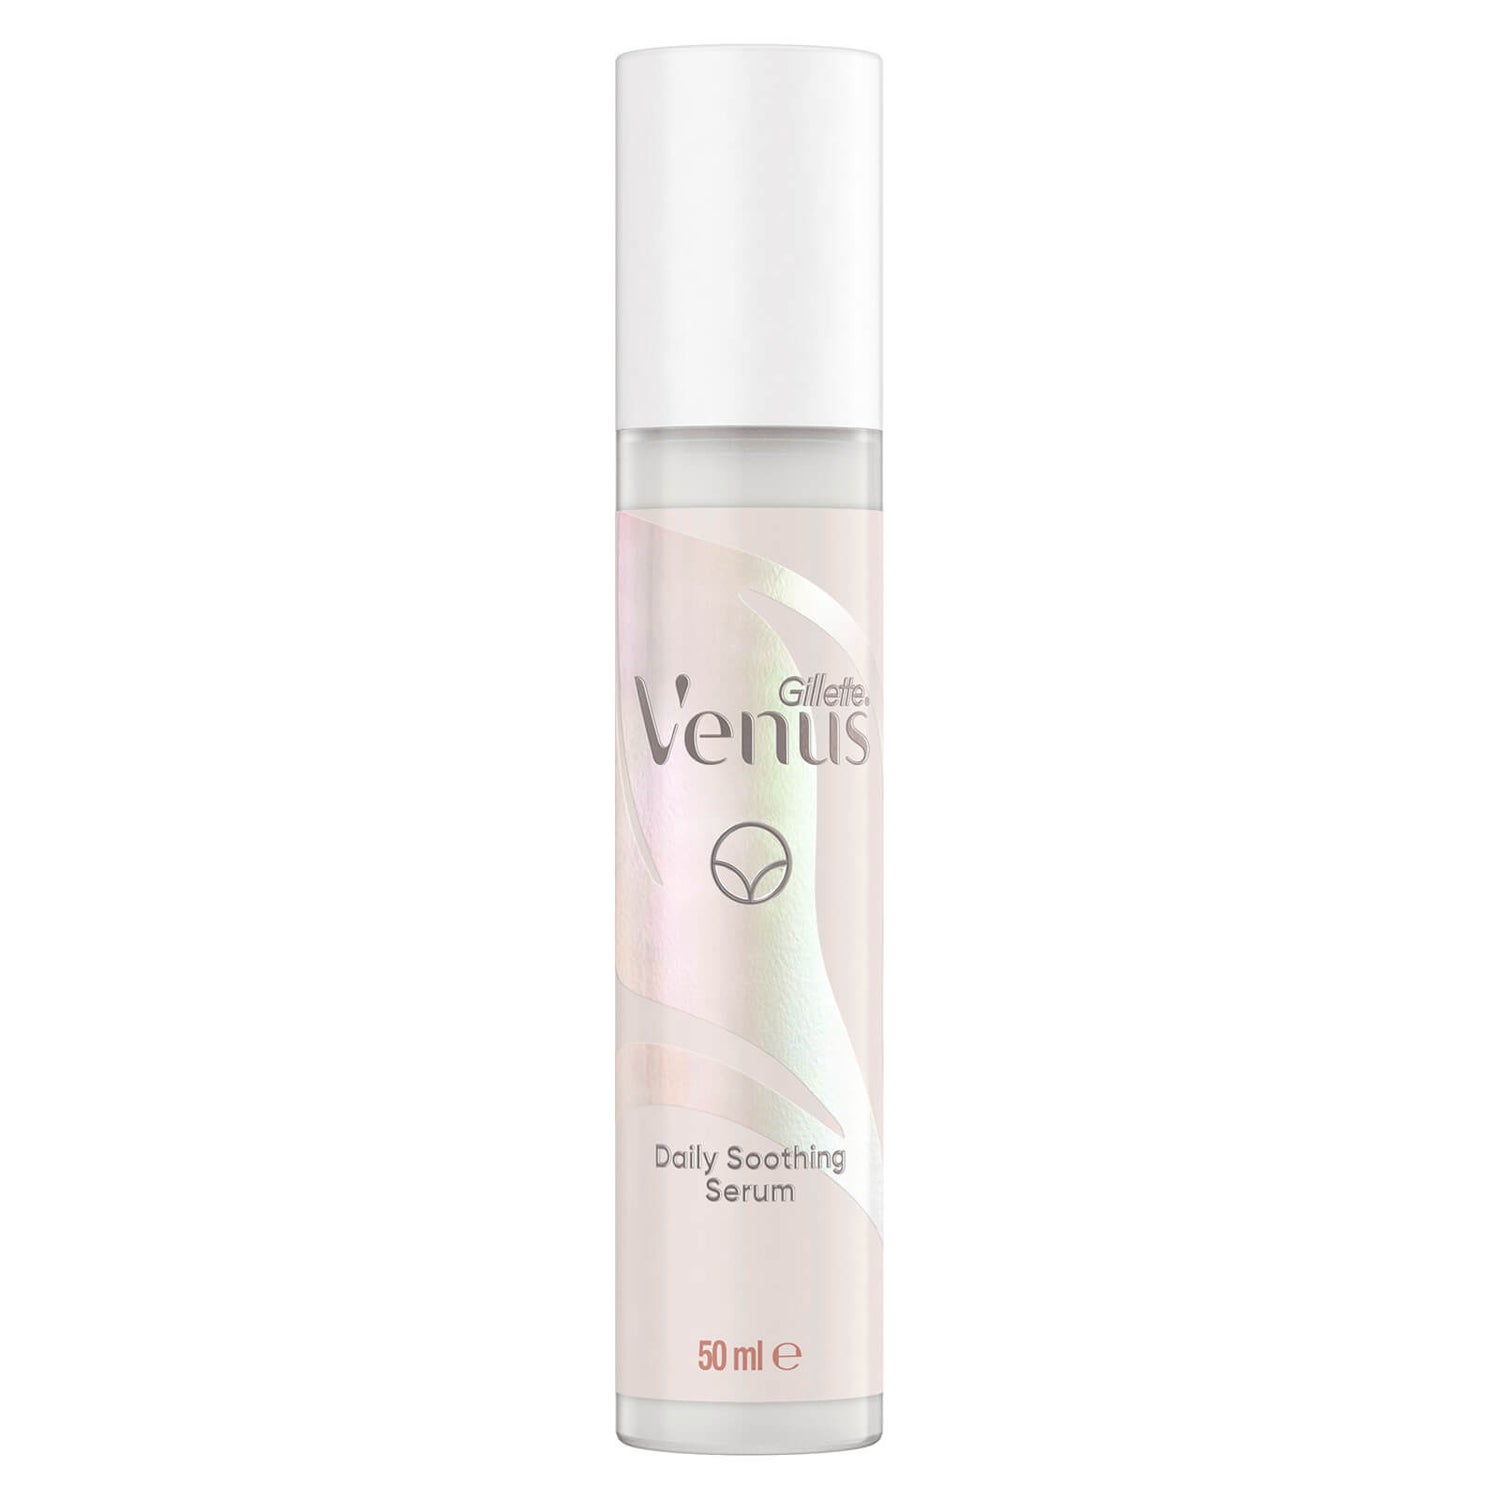 Venus Daily Soothing Serum for Pubic Hair and Skin | Gillette UK